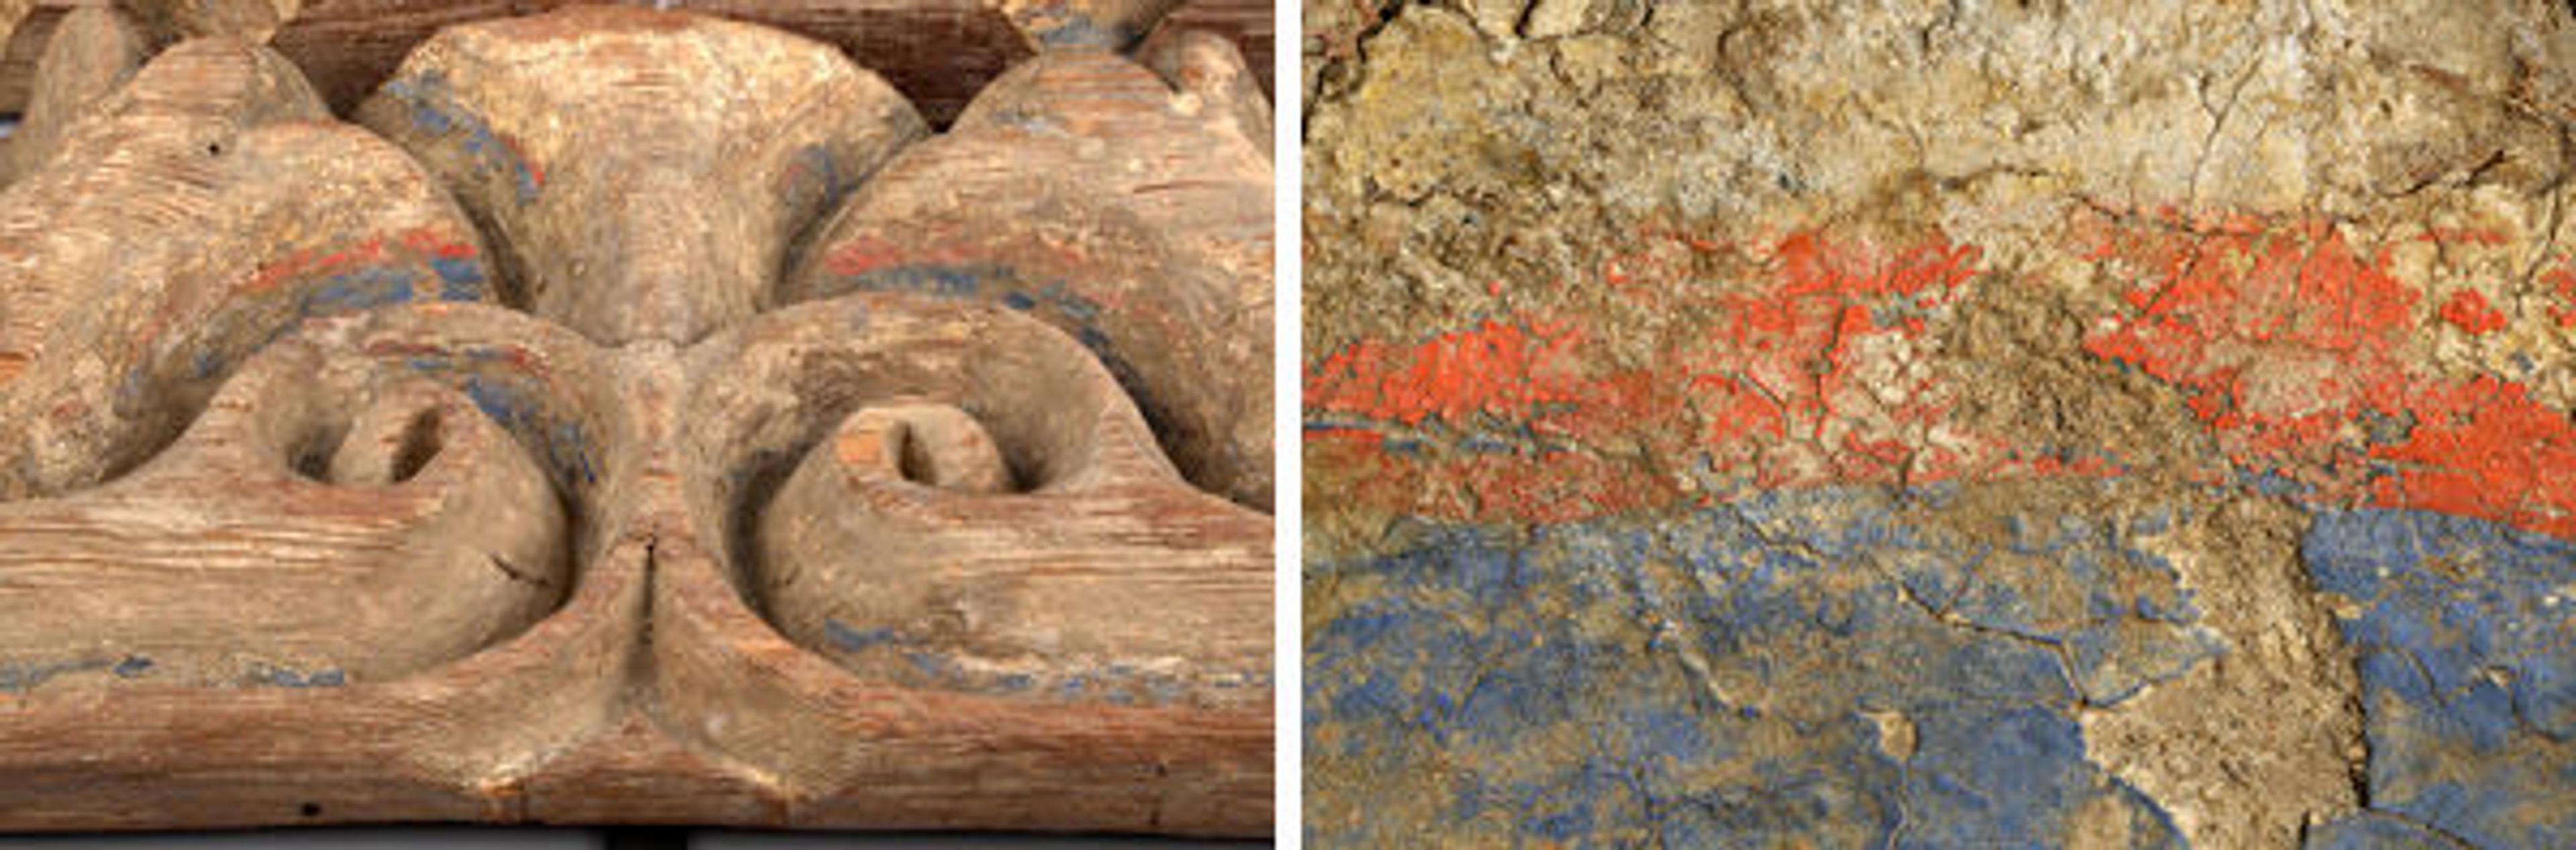 Left: Fig. 6. Remnants of polychrome decoration. Right: Fig. 7. Detail of polychromy showing the red band running  between the blue painted areas and the gilding (marked with red arrows)